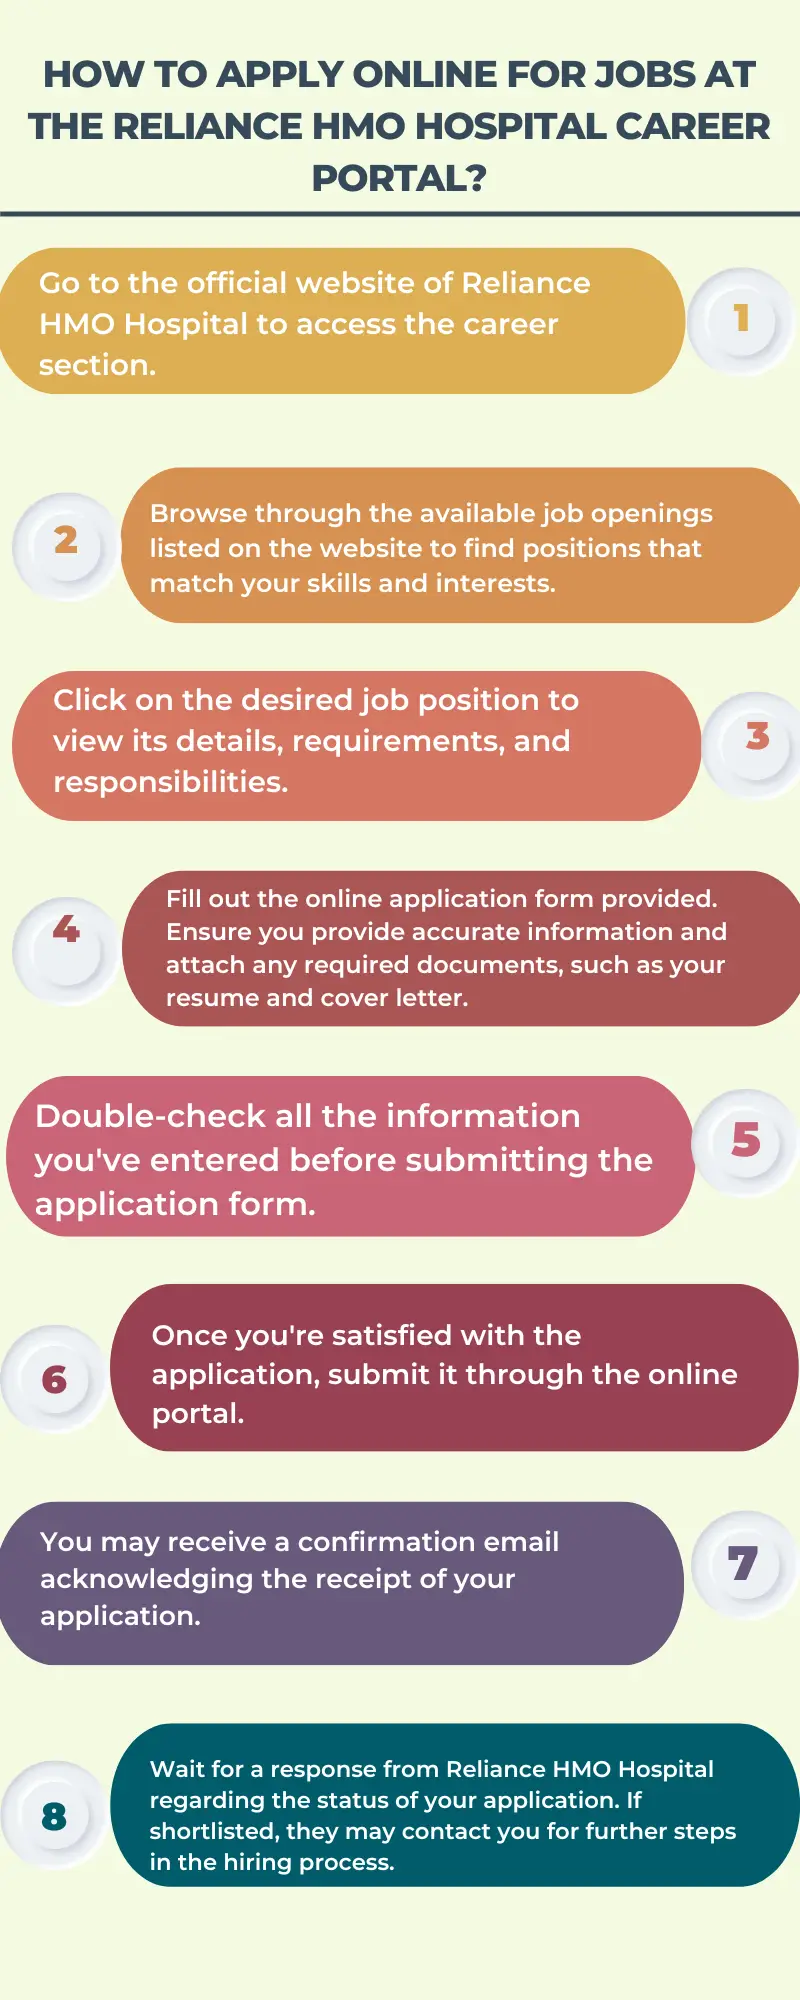 How to Apply Online for Jobs at the Reliance Hmo Hospital Career Portal?